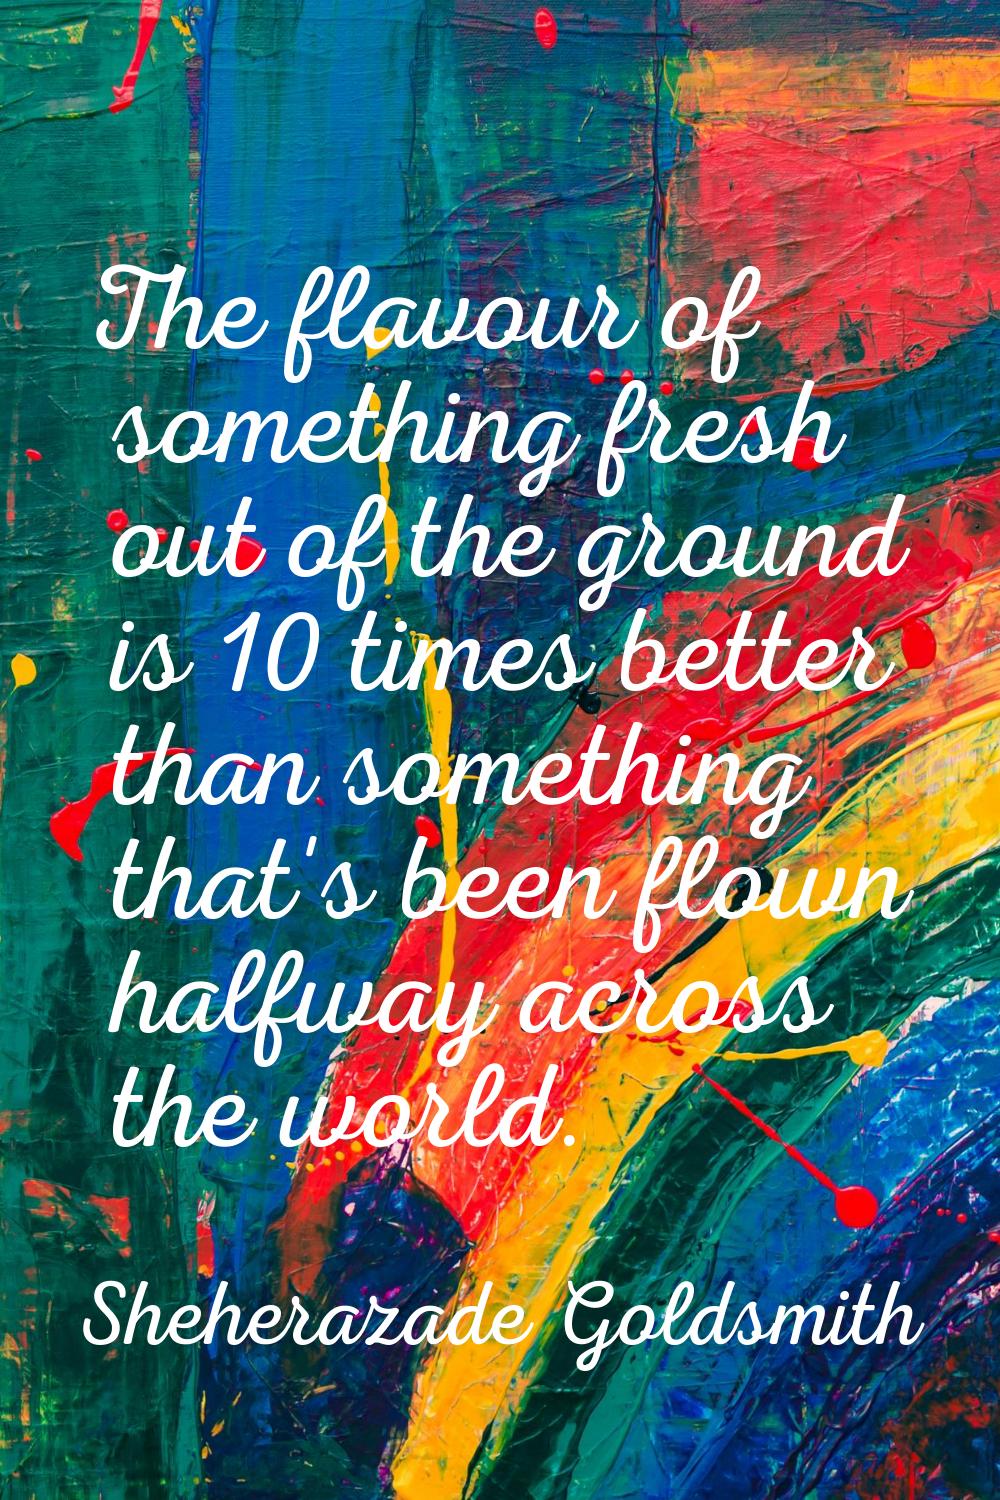 The flavour of something fresh out of the ground is 10 times better than something that's been flow